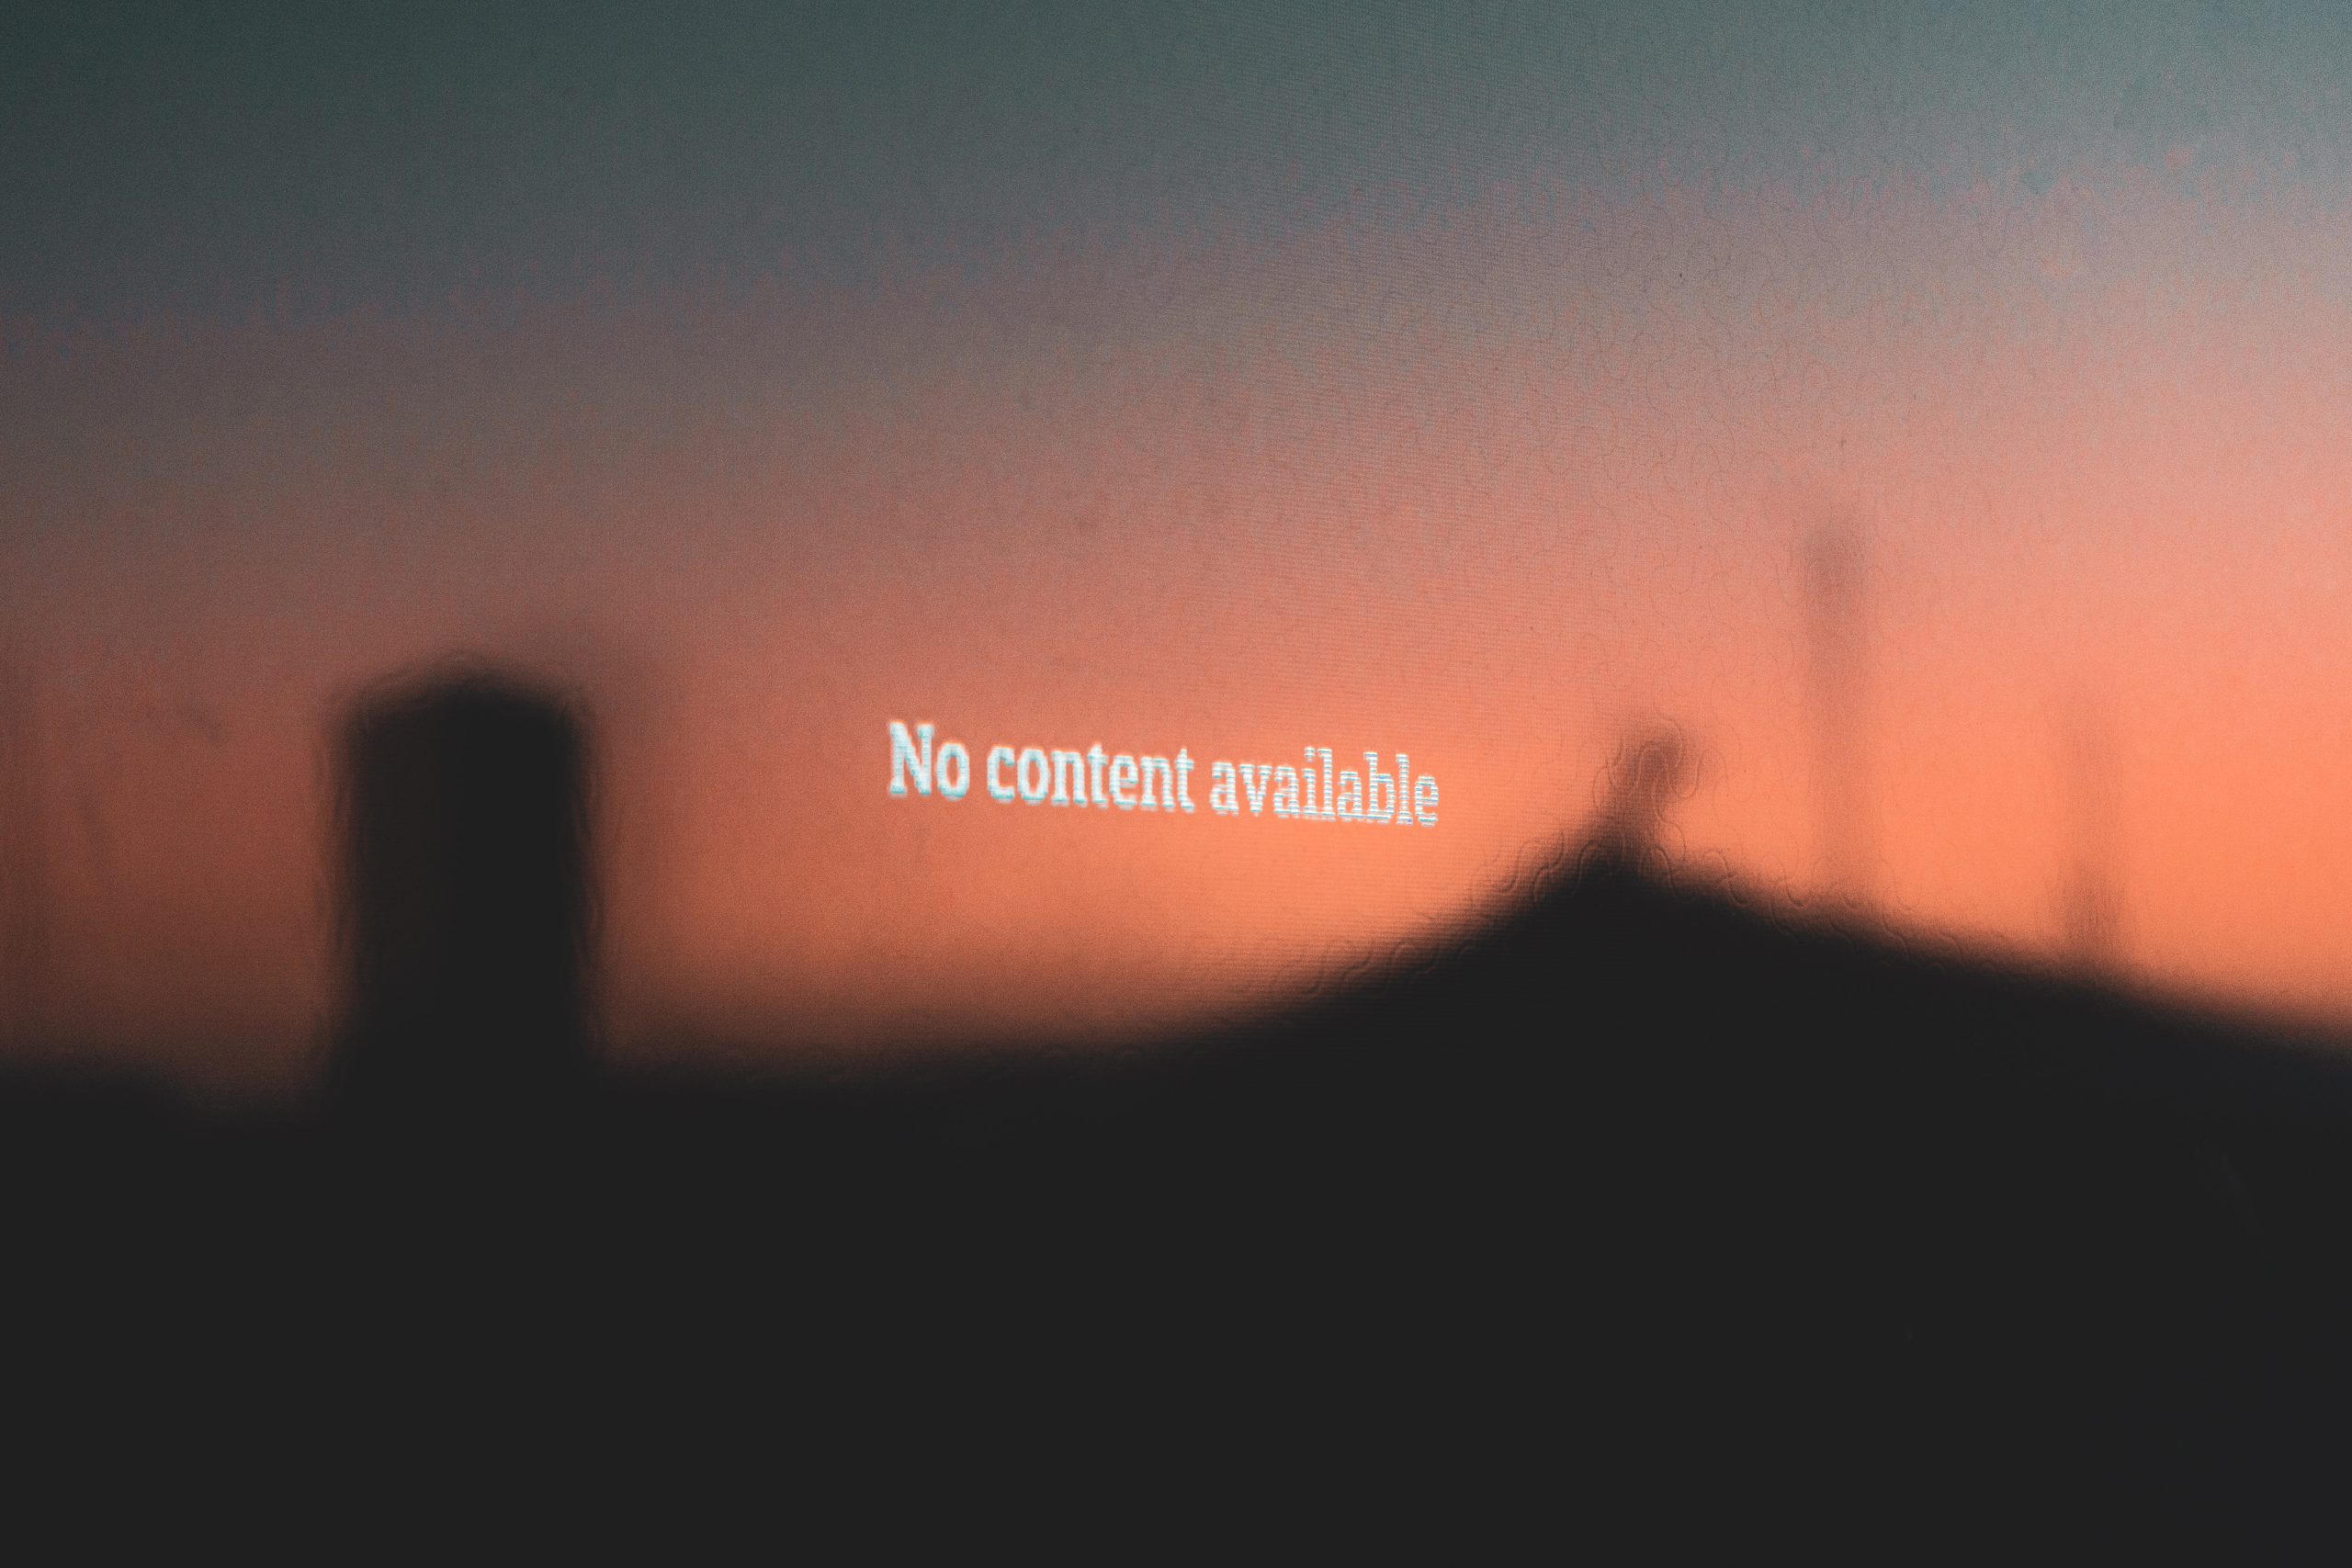 a wallpaper saying "No Content Available"